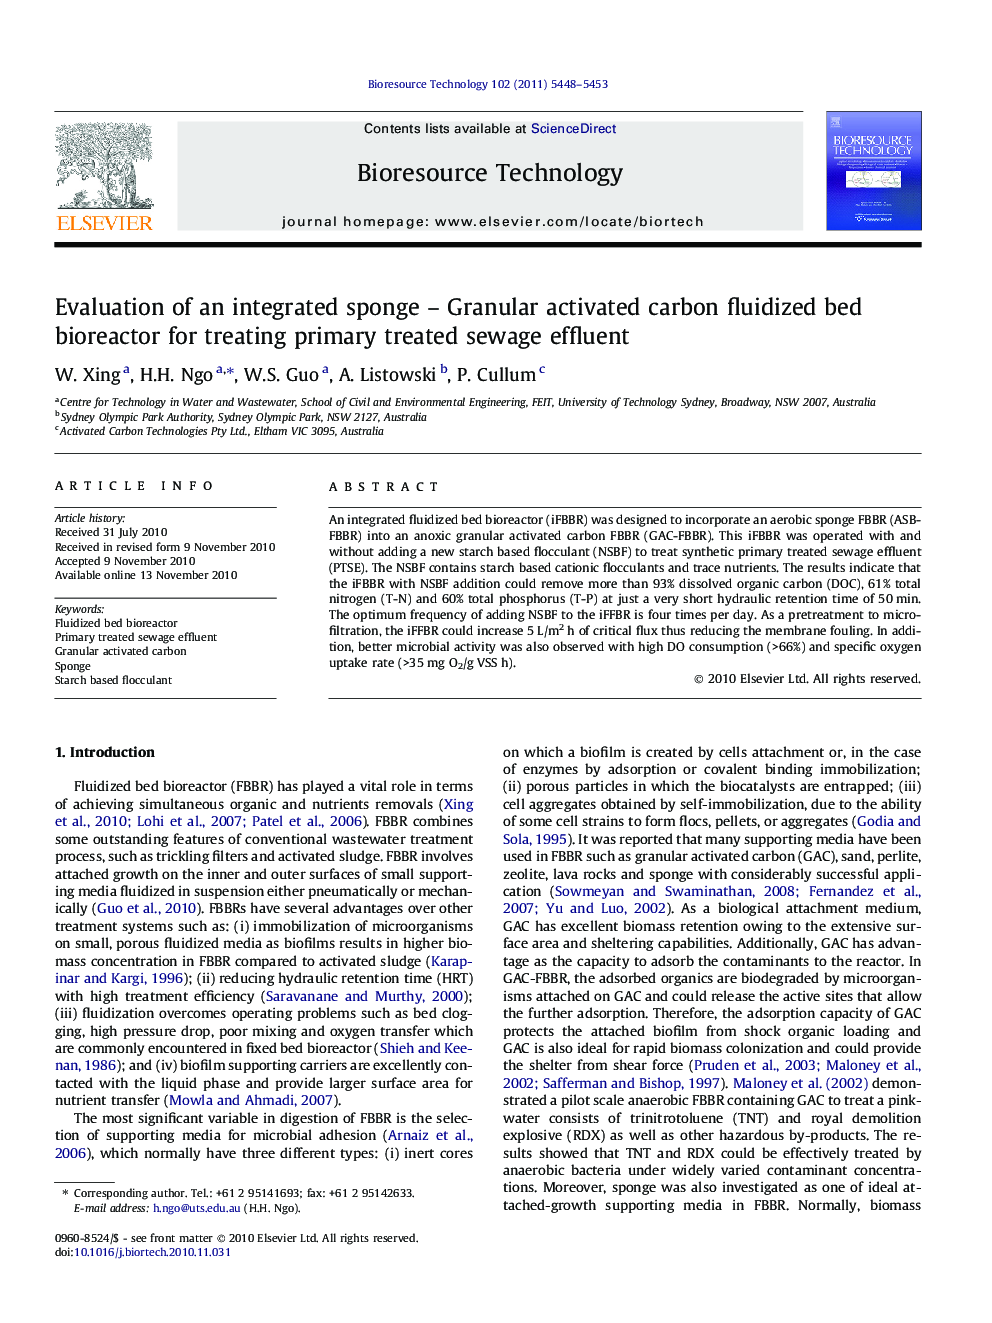 Evaluation of an integrated sponge – Granular activated carbon fluidized bed bioreactor for treating primary treated sewage effluent